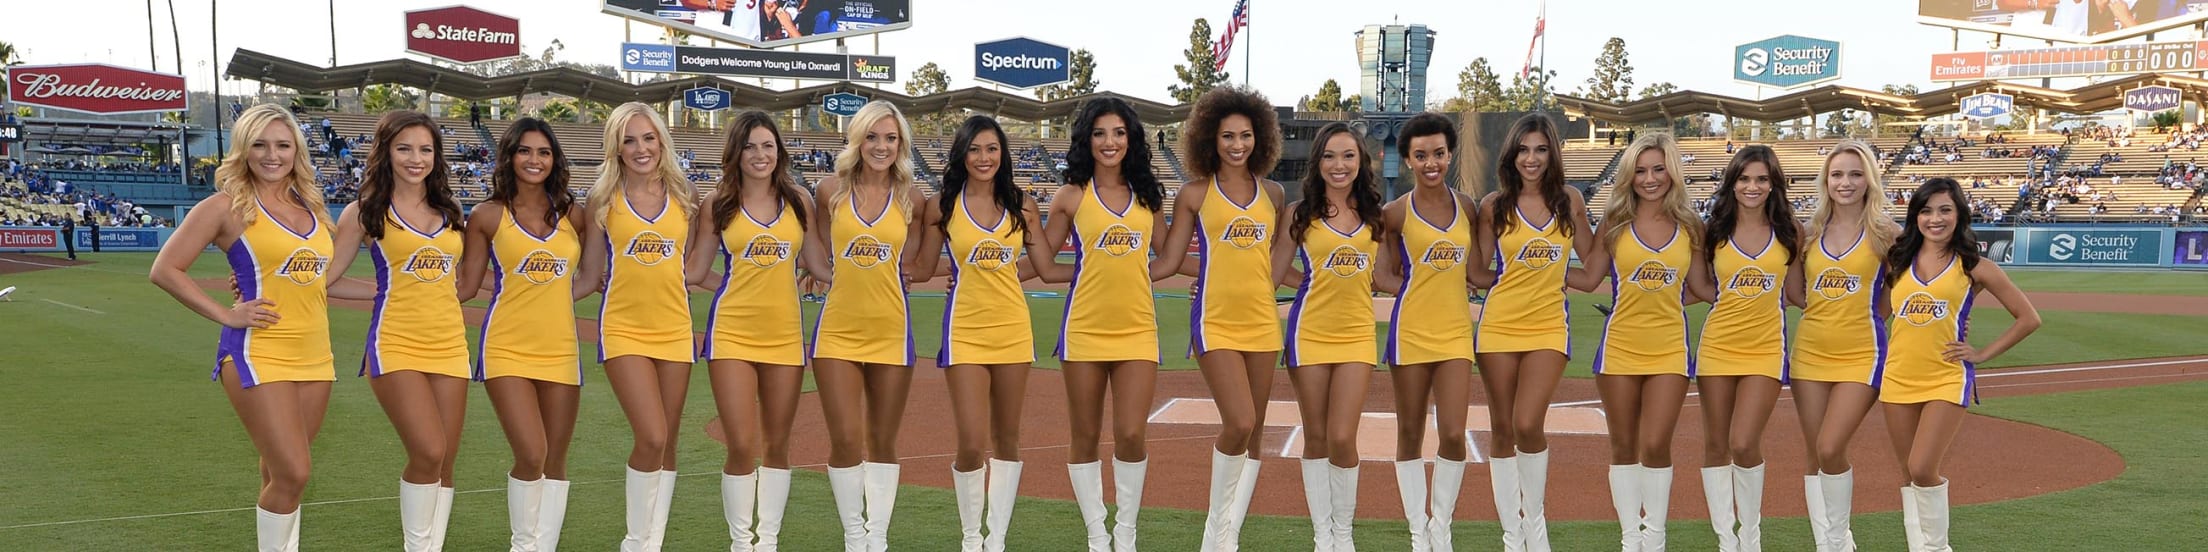 Lakers Night Los Angeles Dodgers